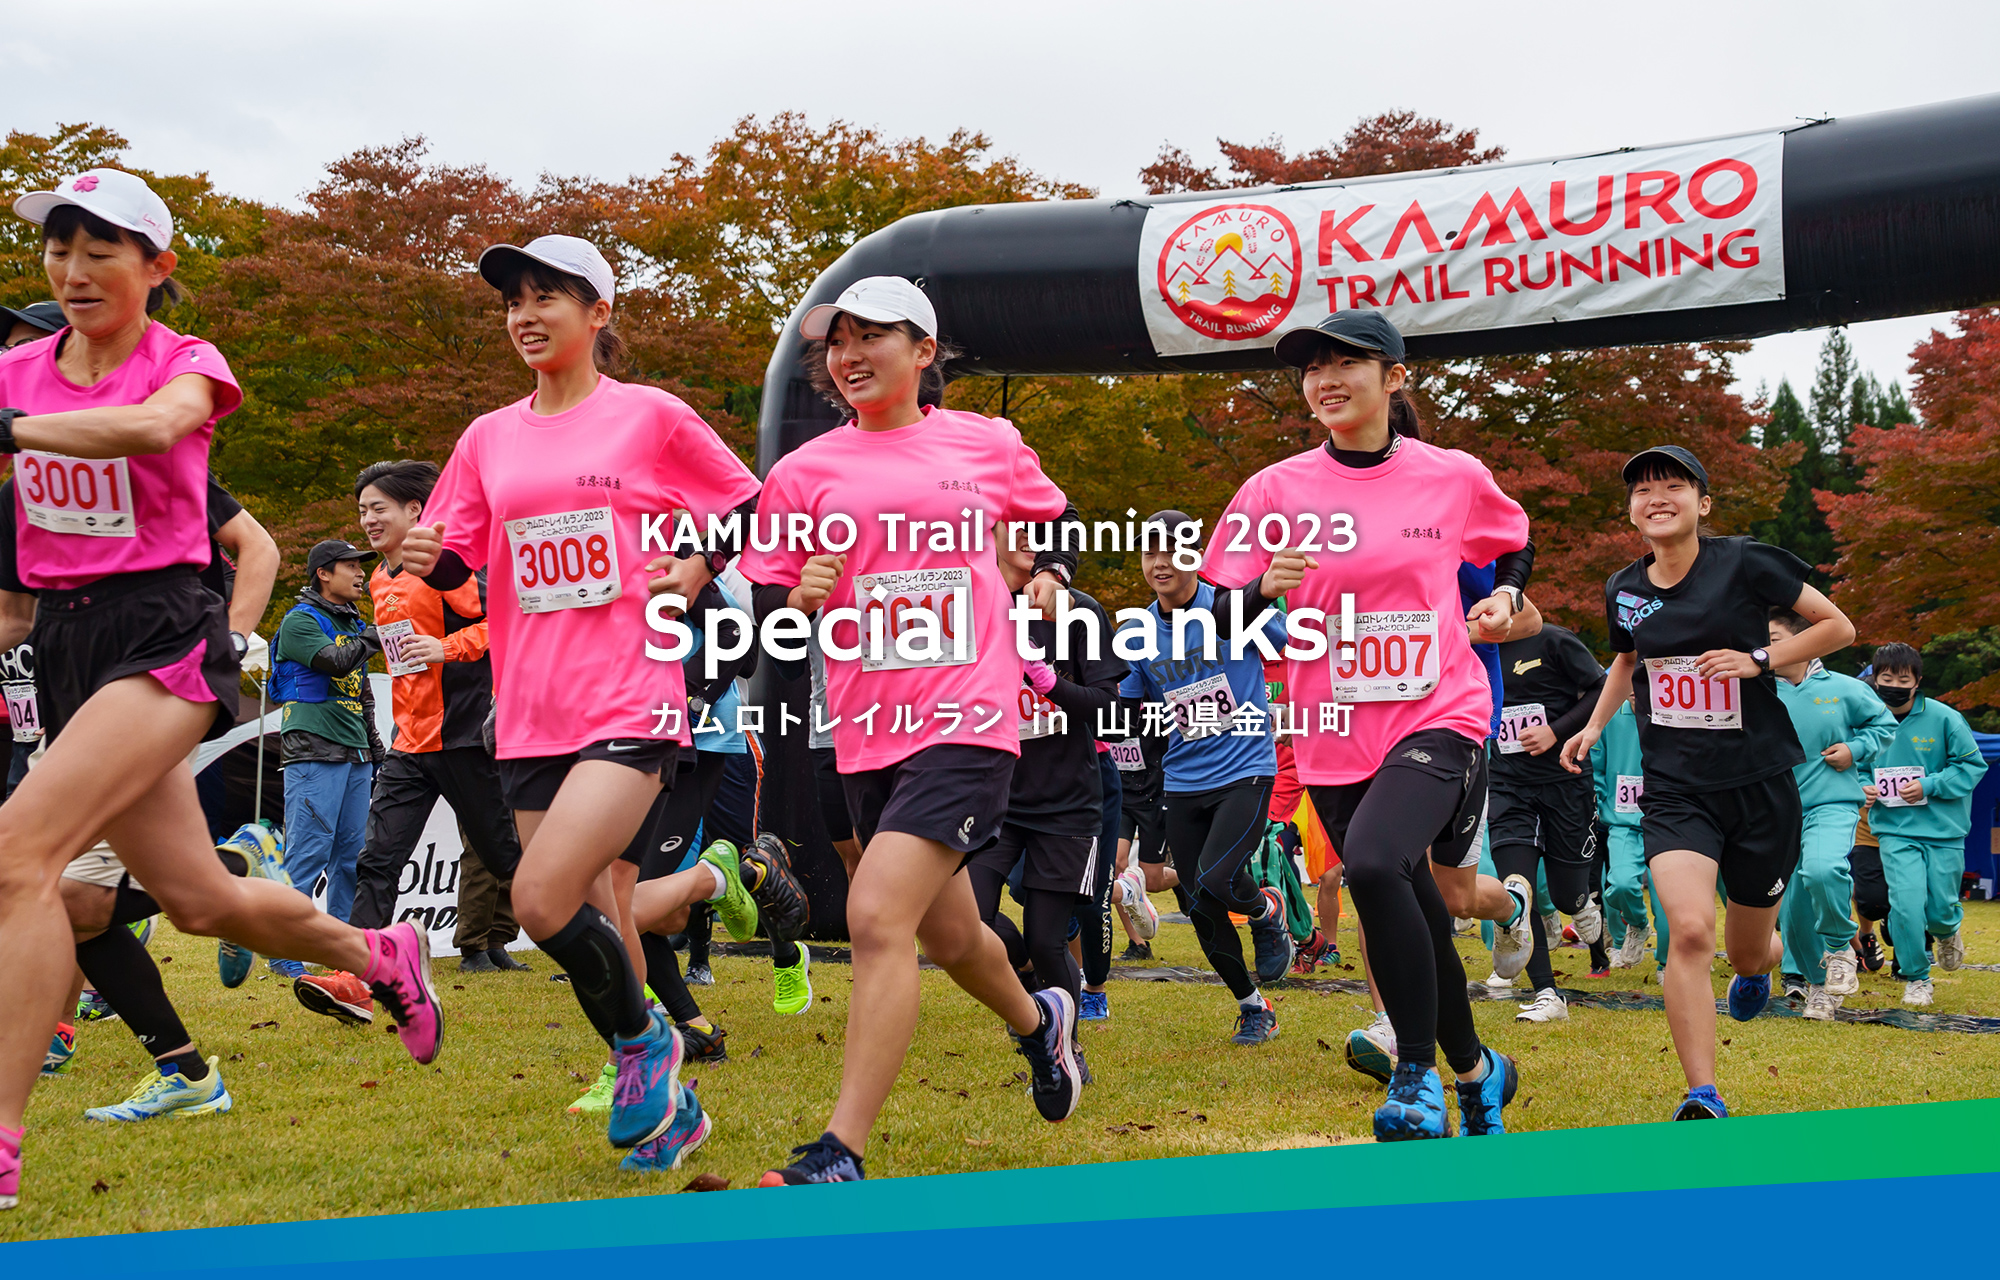 KAUMURO Trail running 2023 Special thanks！ カムロトレイルラン in ⼭形県⾦⼭町